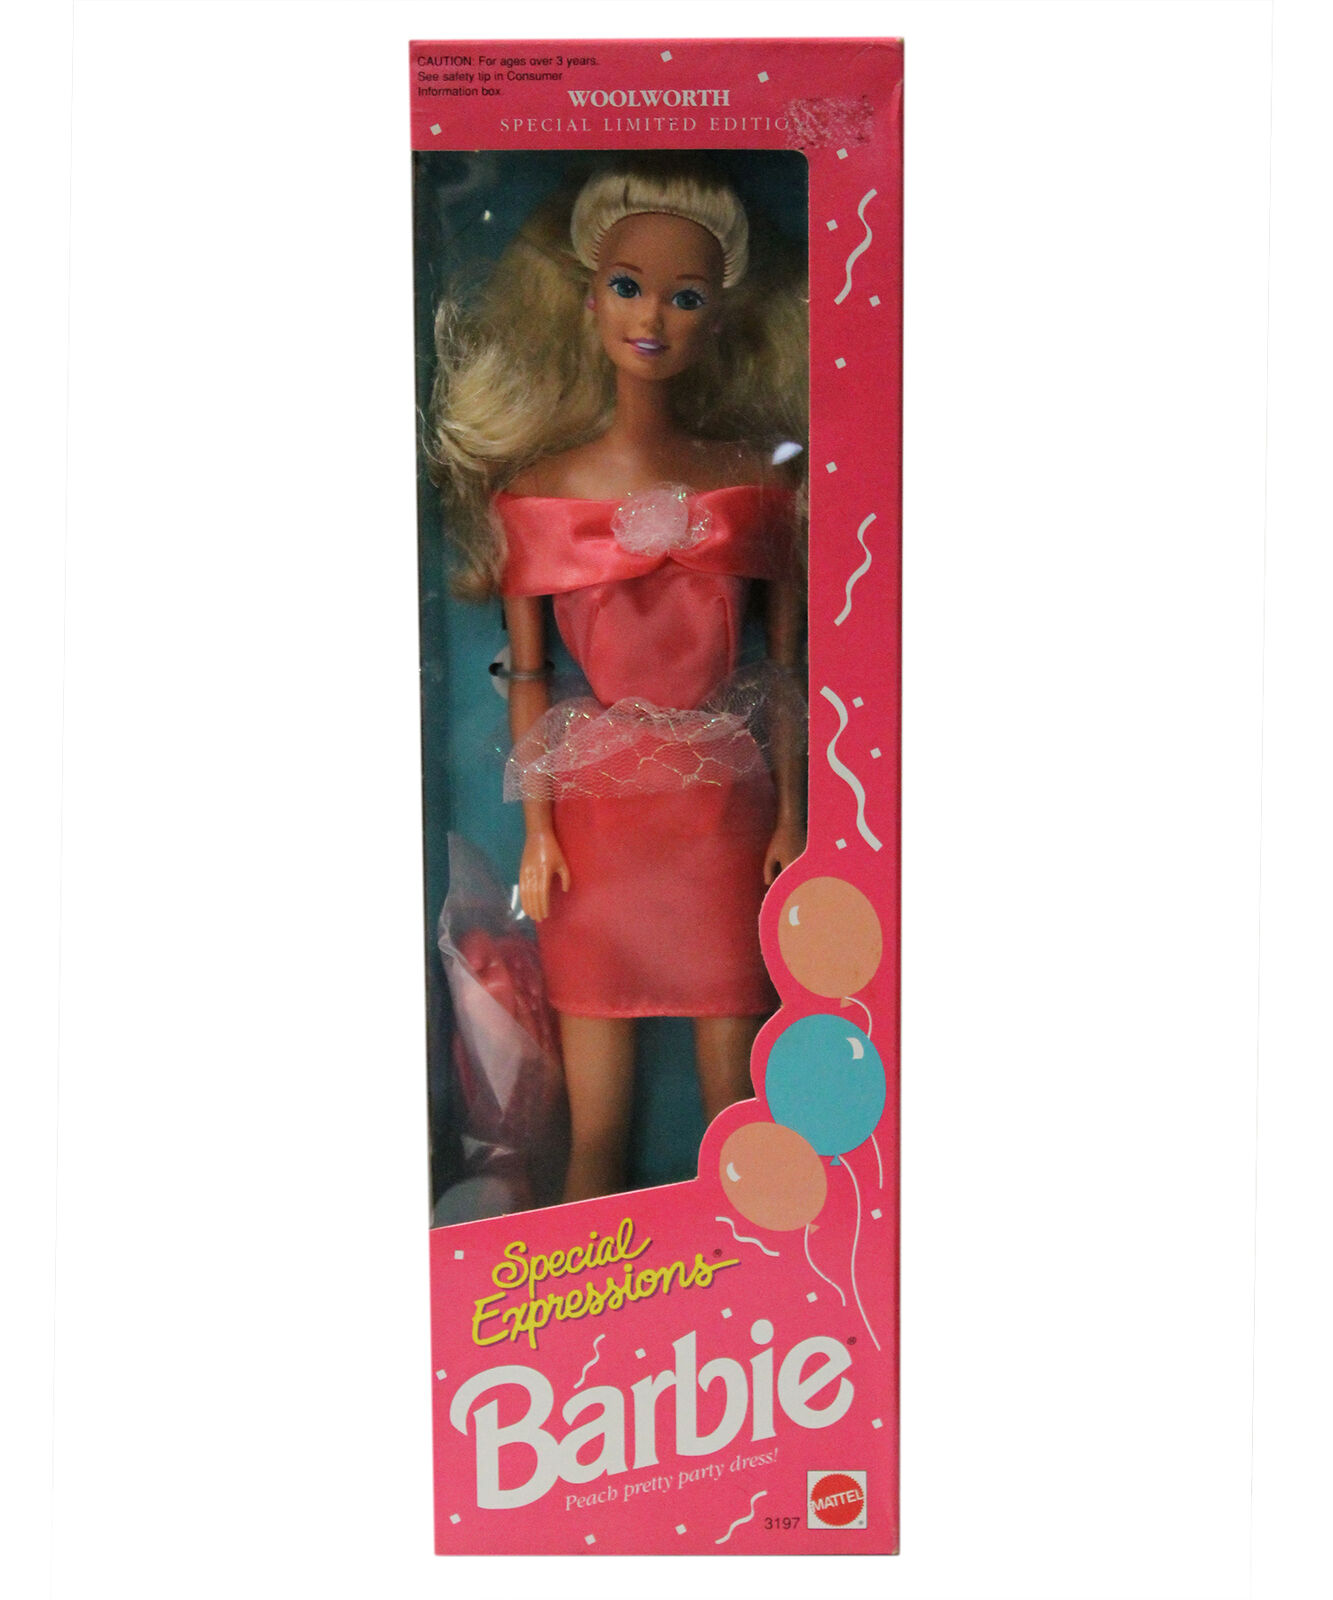 1992 Special Expressions Barbie, NRFB, (3197) Non-Mint Box - Woolworth